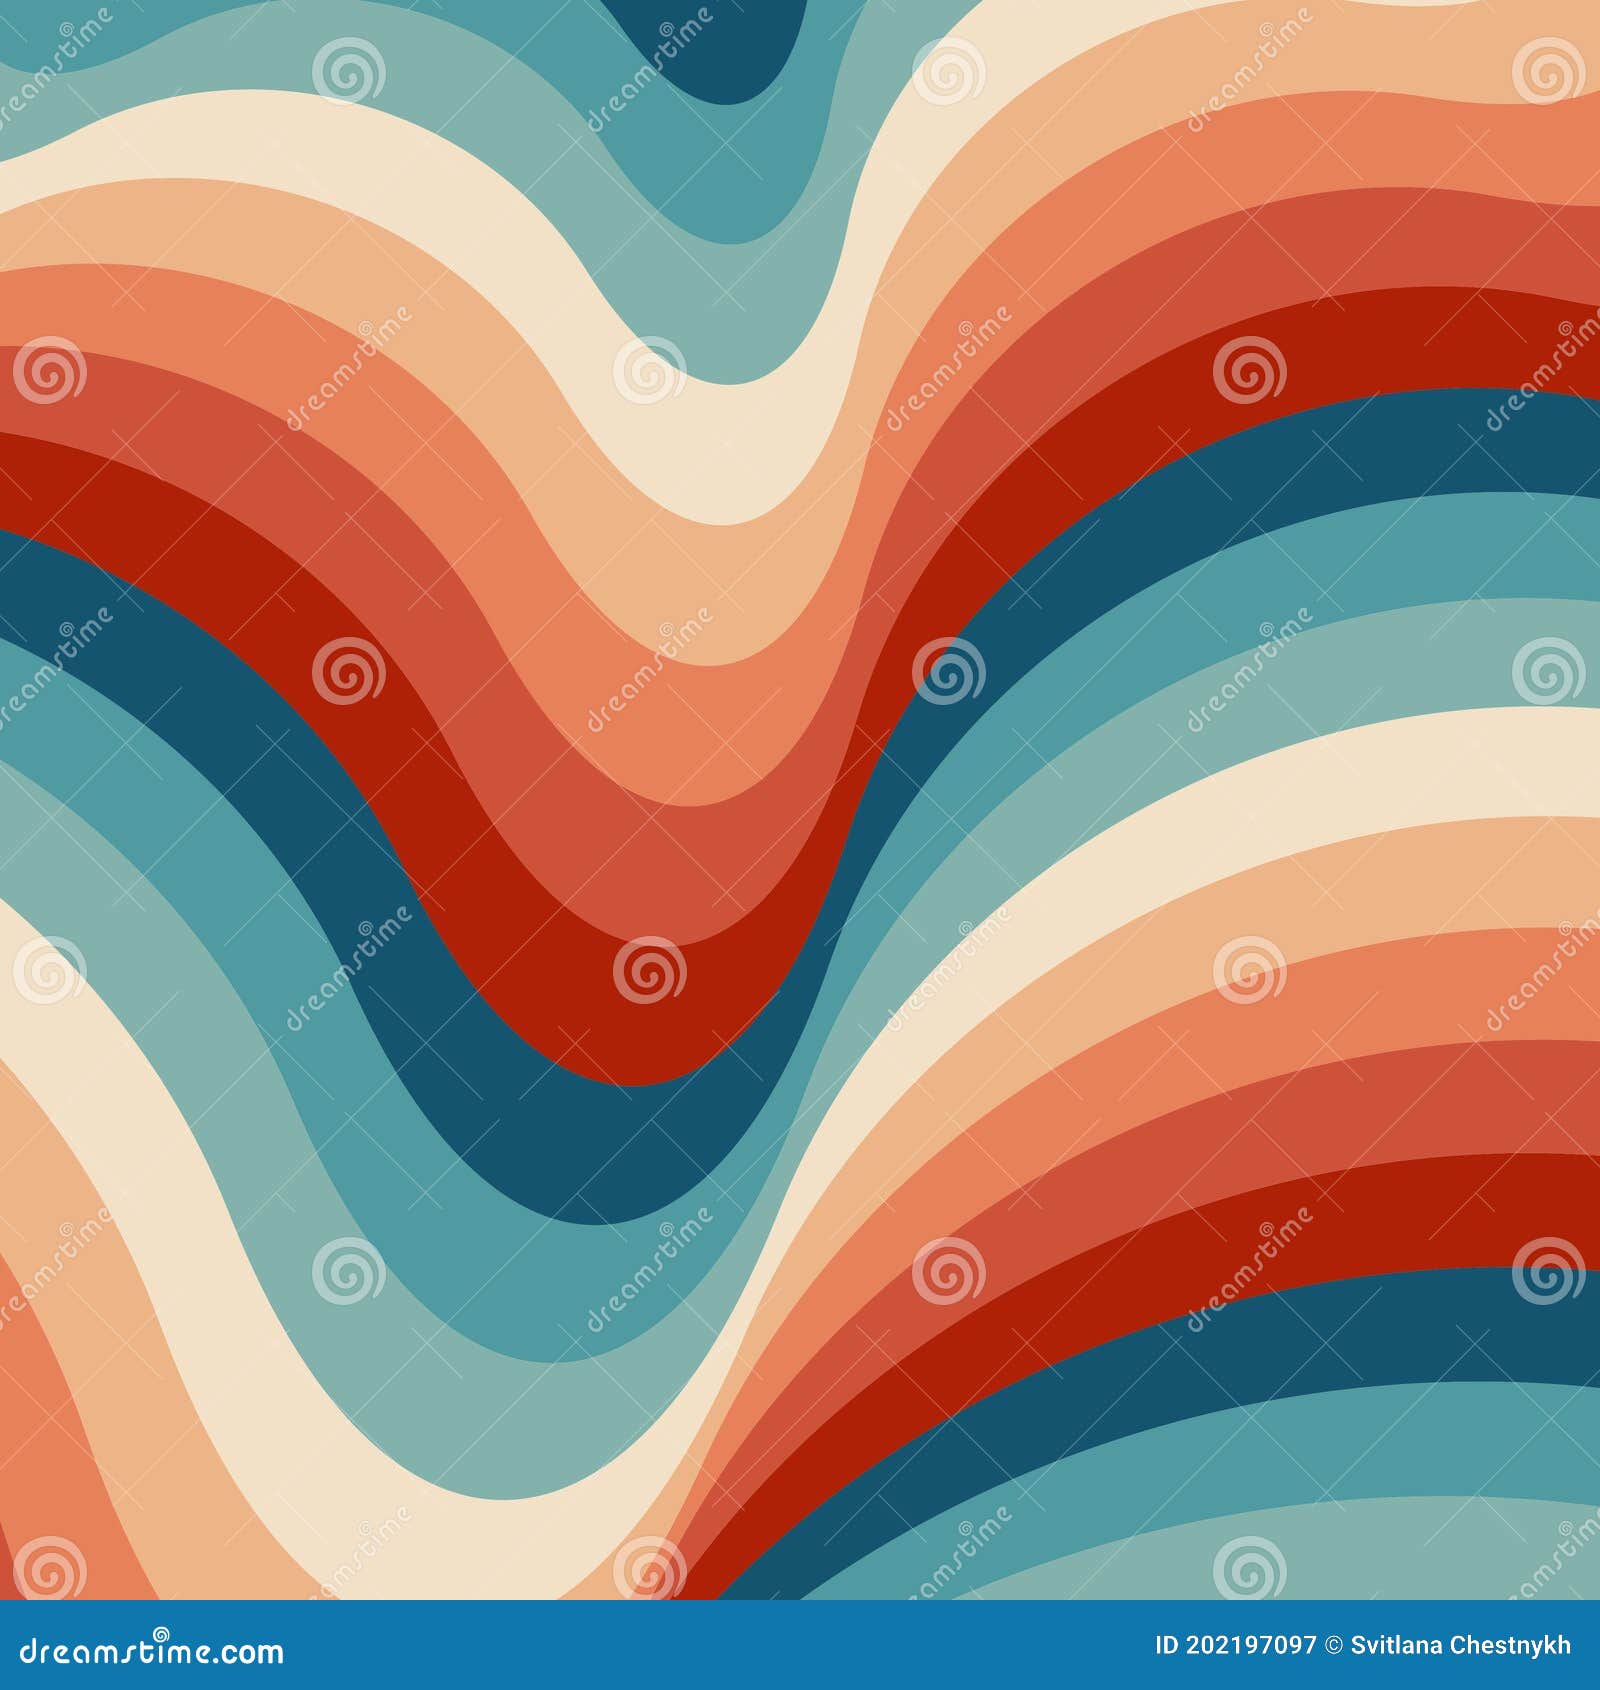 Premium Vector  Hypnotic heart shaped tunnel rainbow retro wallpaper in  the mood of the psychedelic 70s